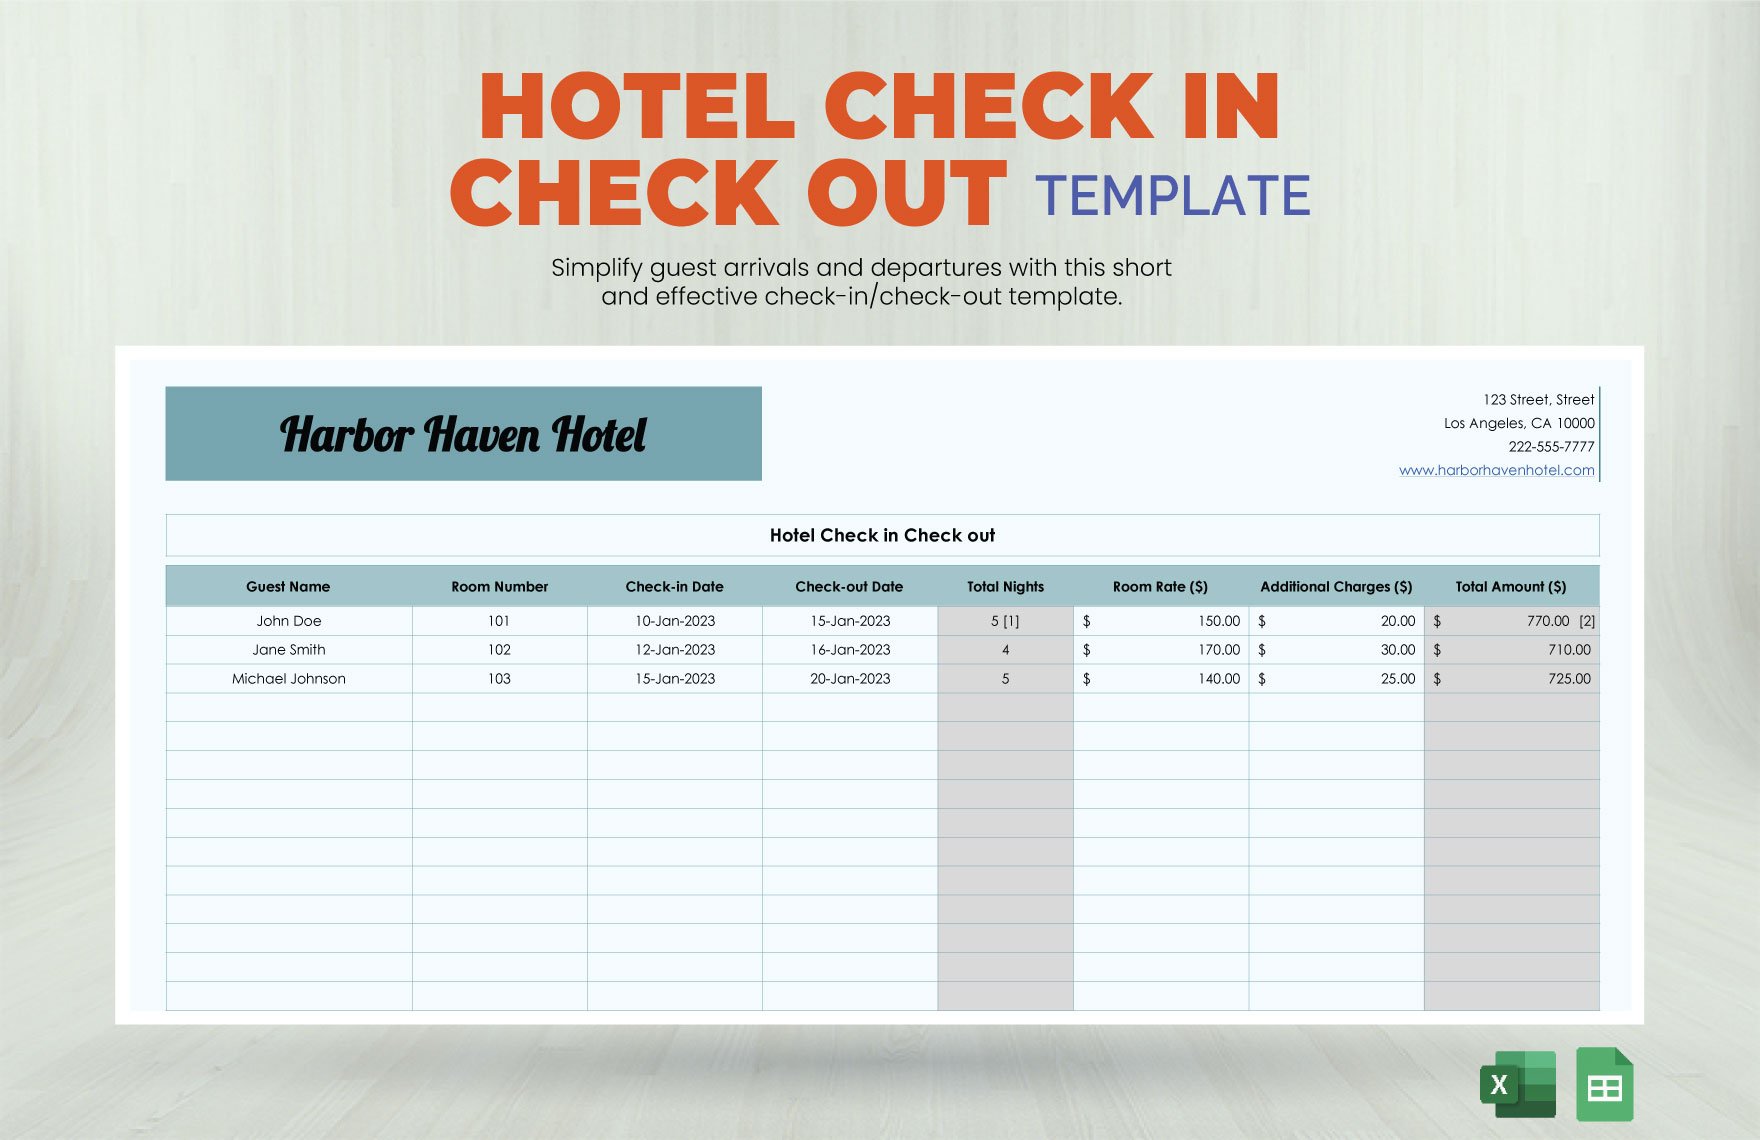 Hotel Check in Check out Template in Excel, Google Sheets